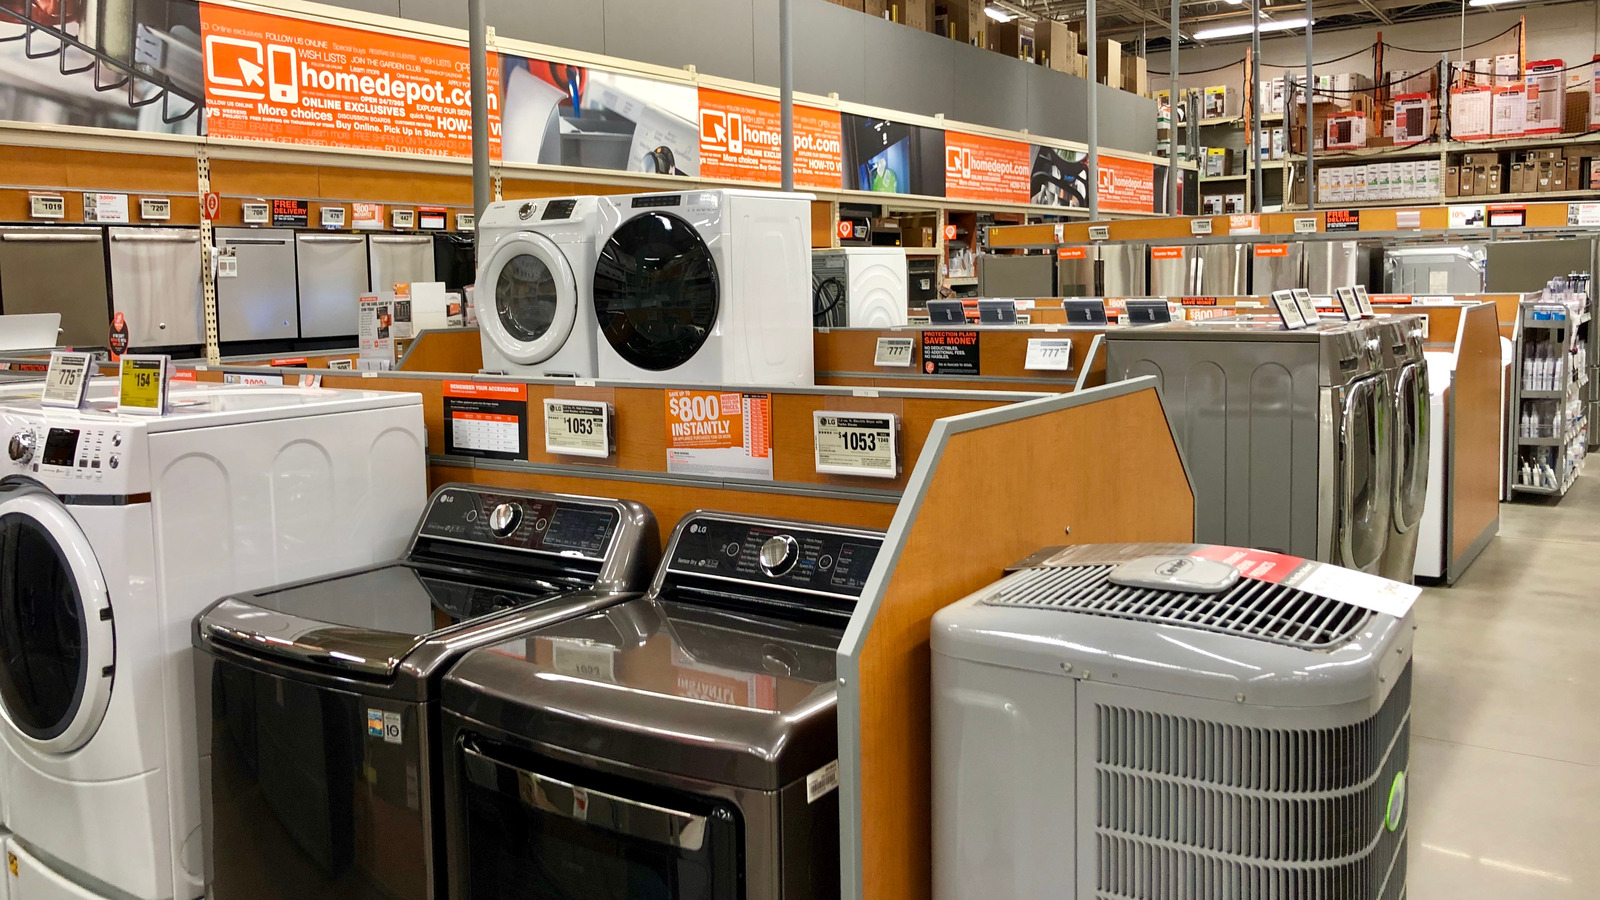 https://www.housedigest.com/img/gallery/why-buying-appliances-at-home-depot-may-cause-you-trouble/l-intro-1657641932.jpg